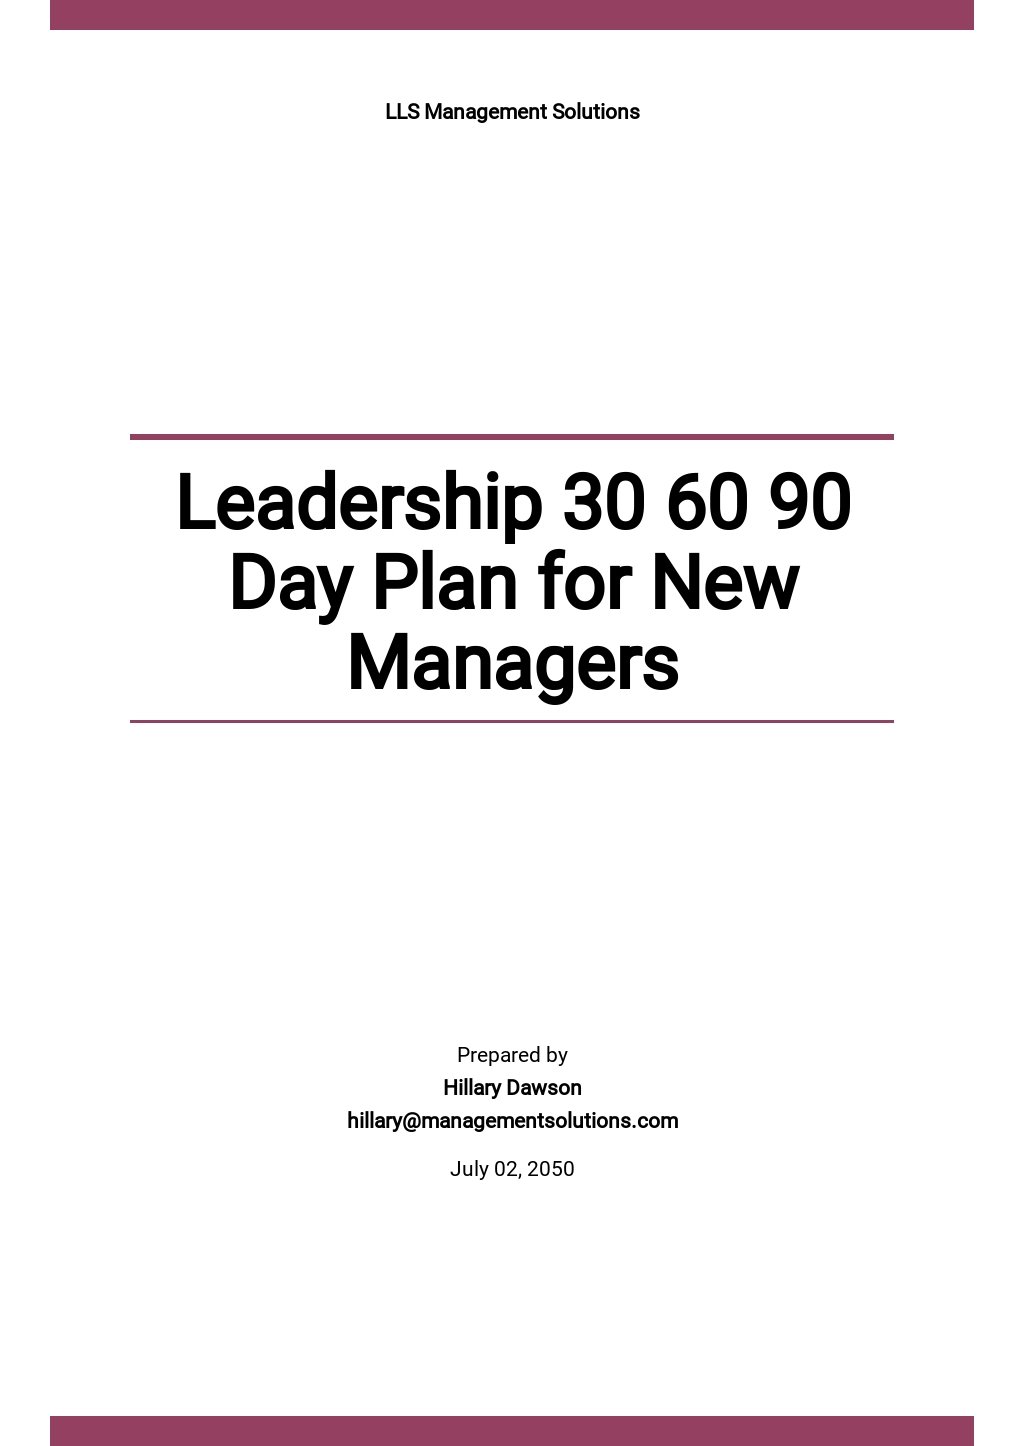 new leadership role 90 day plan